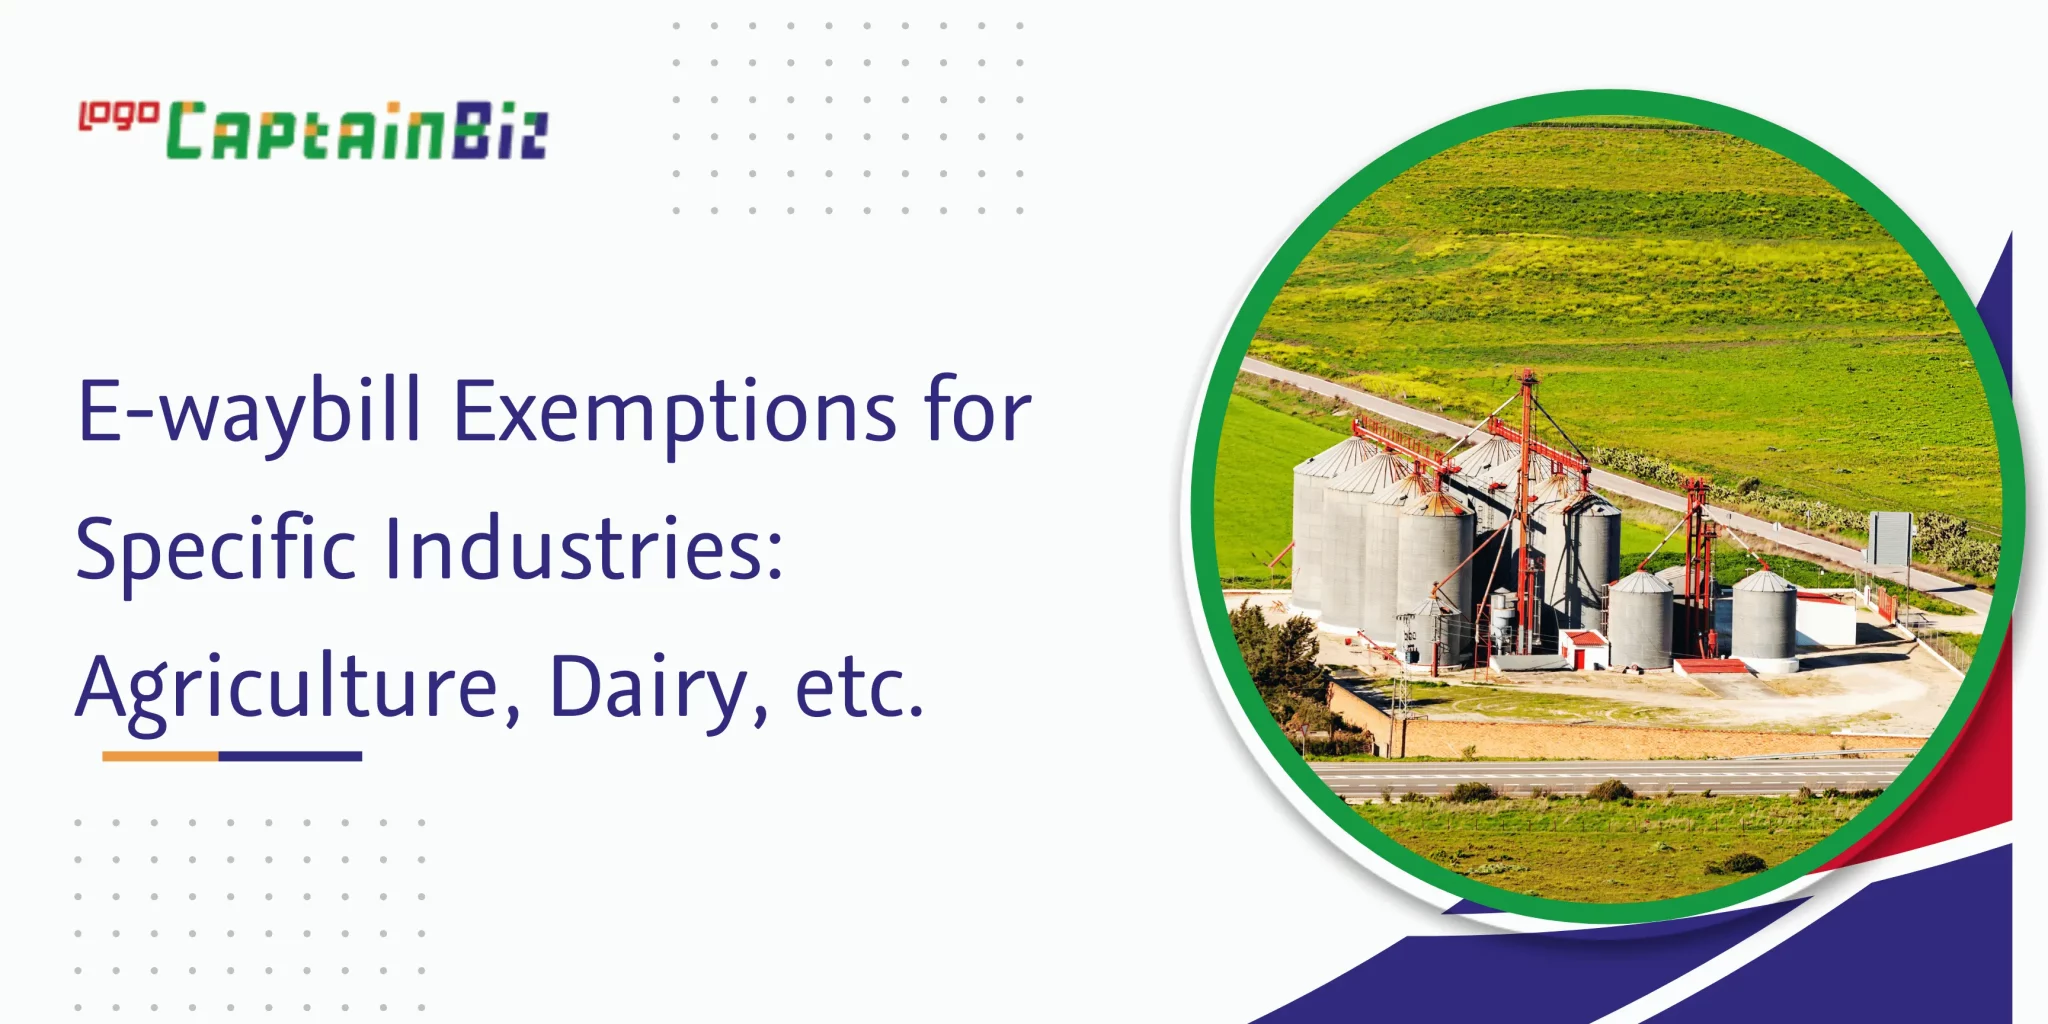 captainbiz e waybill exemptions for specific industries agriculture dairy etc